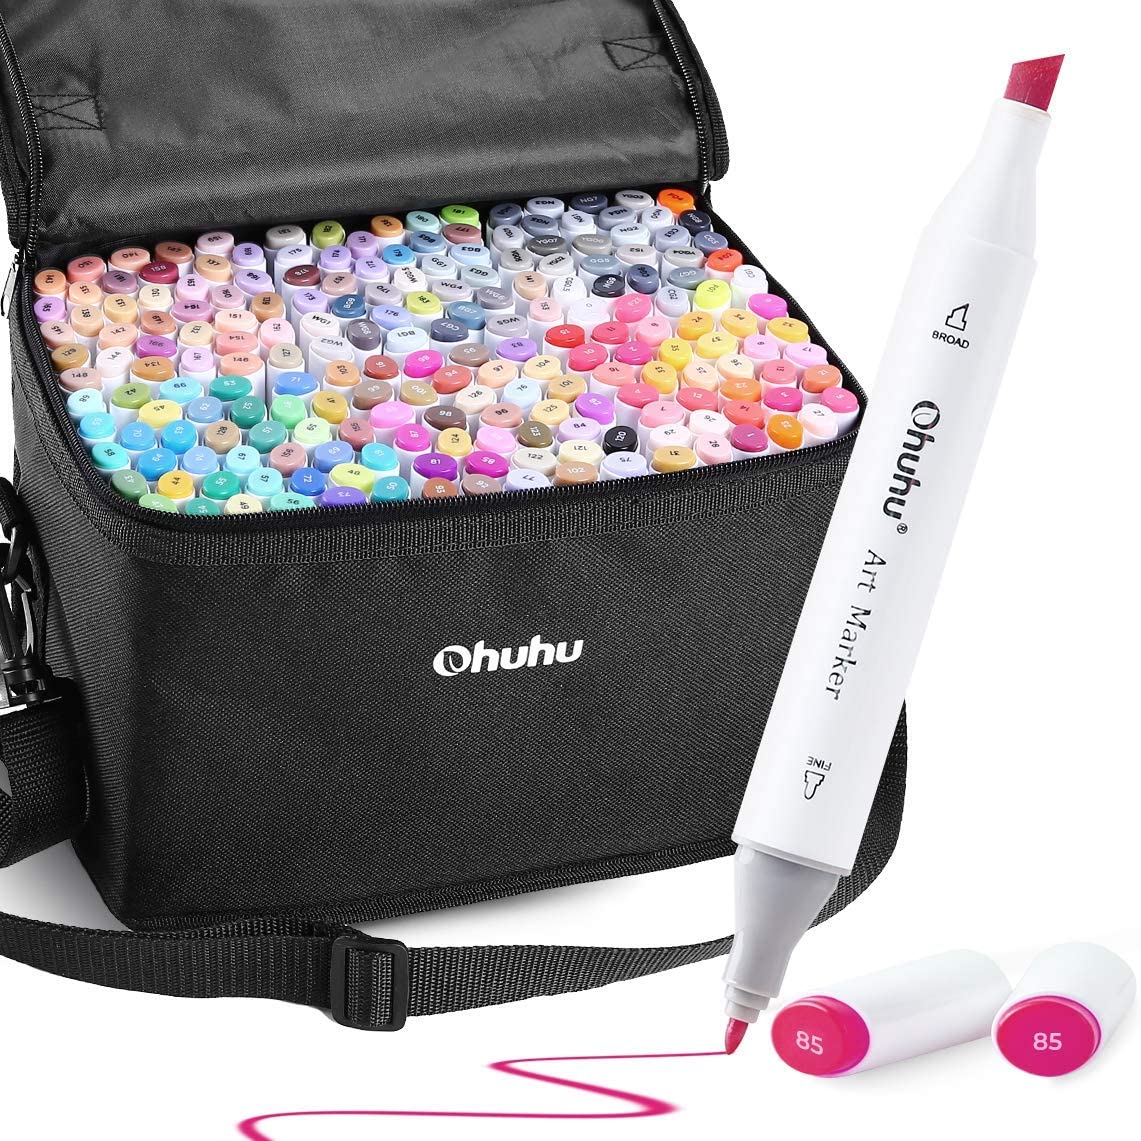 Ohuhu Marker Pen 100 Colors Oil-based Alcohol Marker w/Carry Case